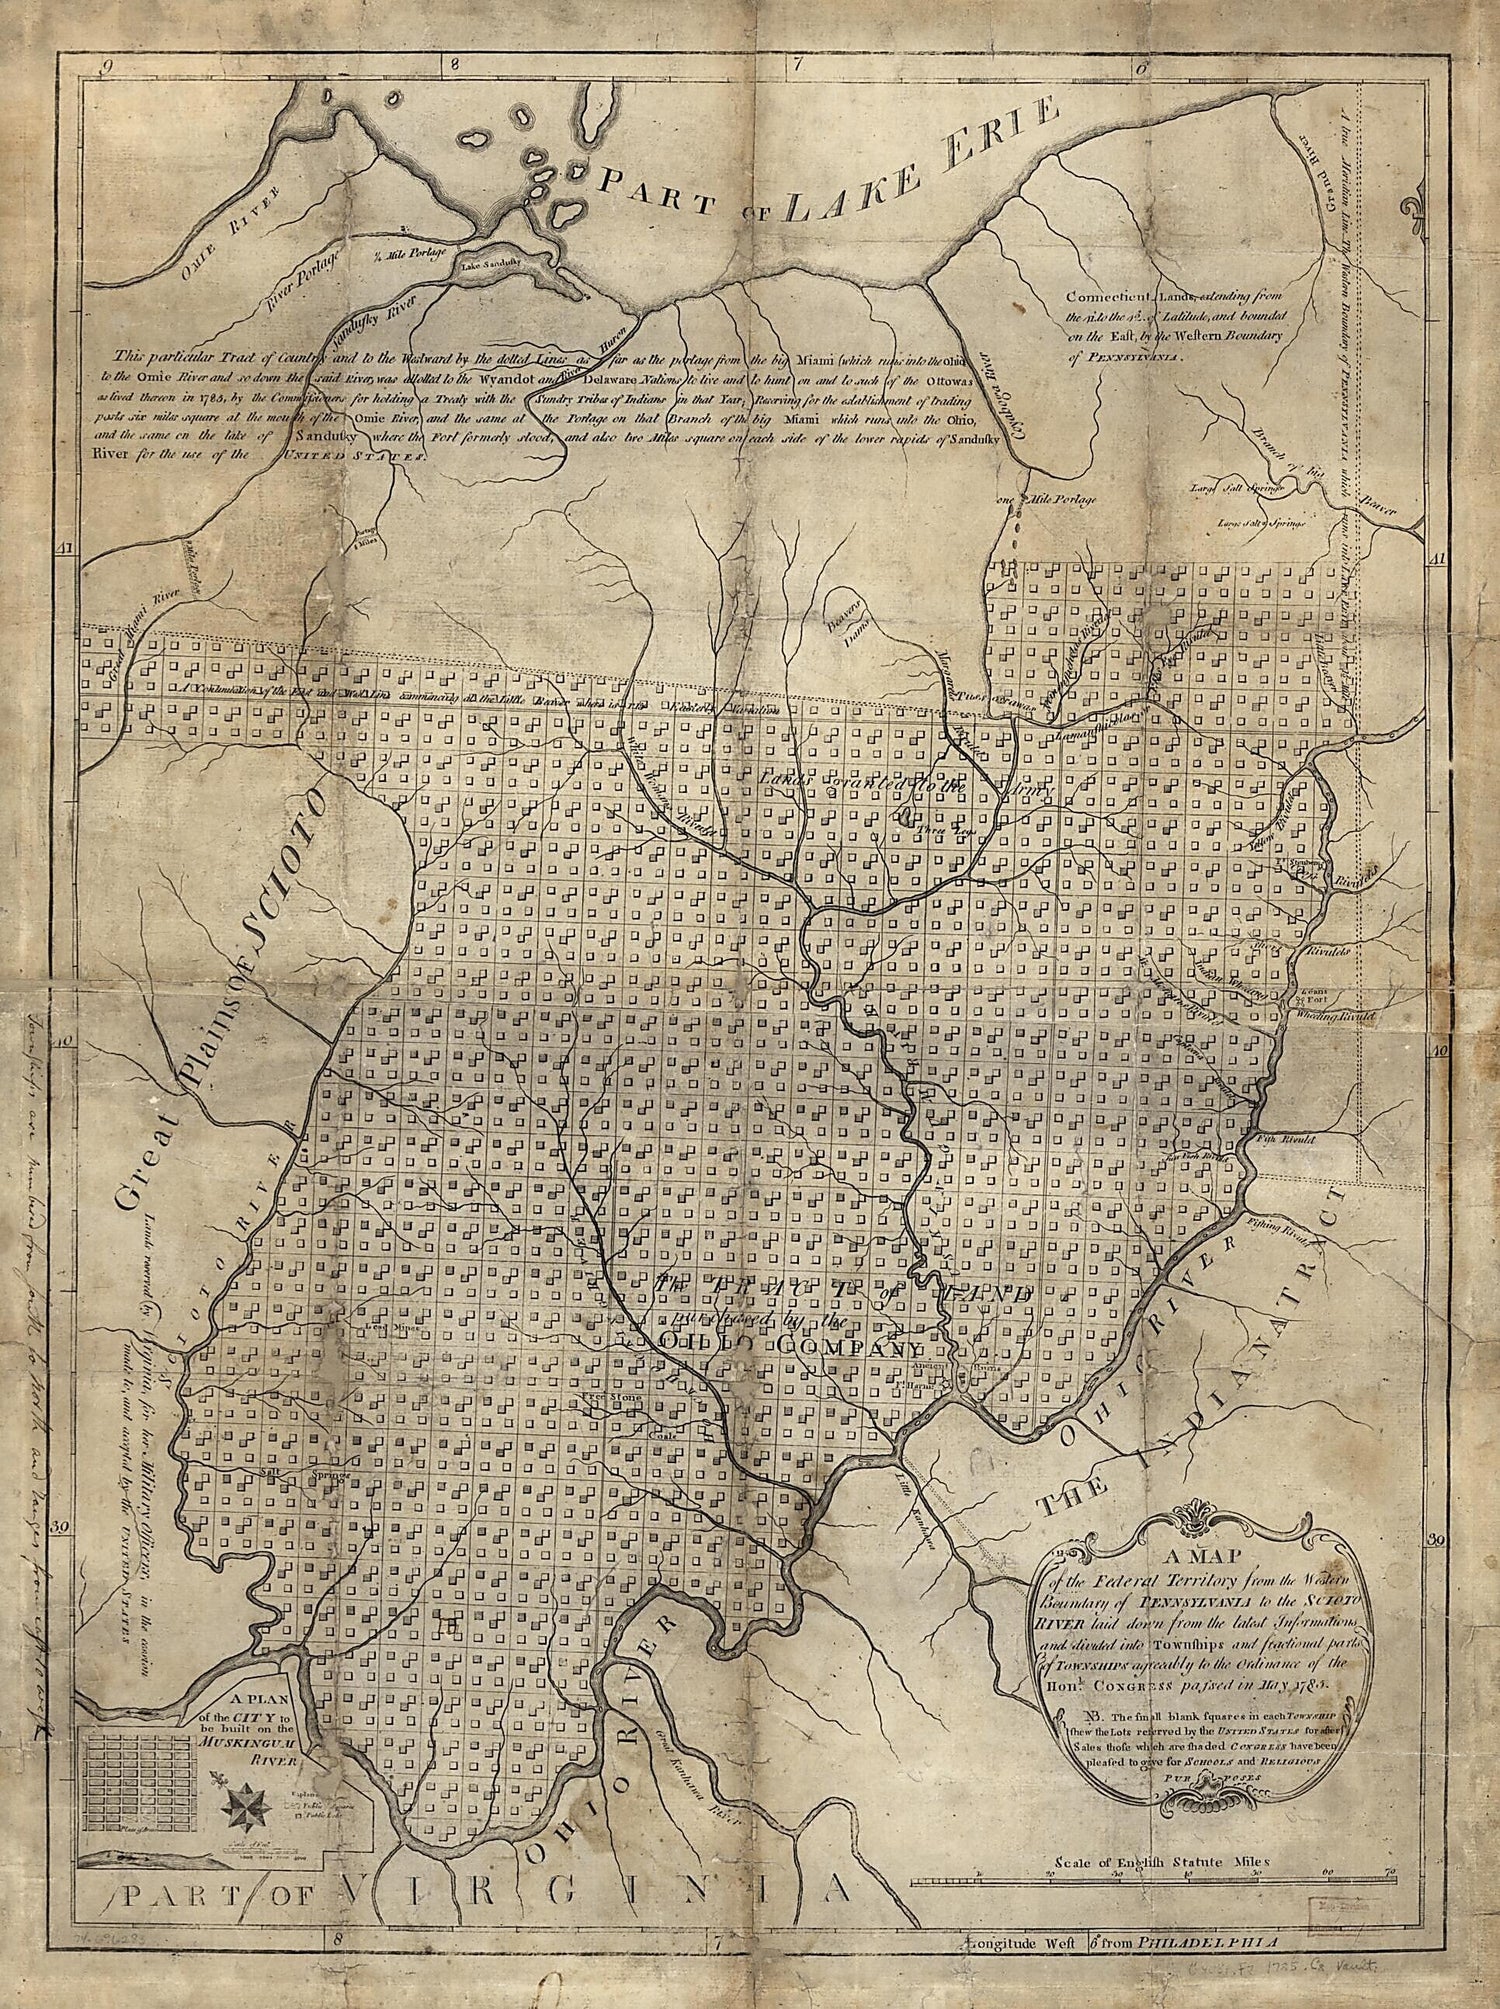 This old map of A Map of the Federal Territory from the Western Boundary of Pennsylvania to the Scioto River from 1785 was created by Manasseh Cutler in 1785